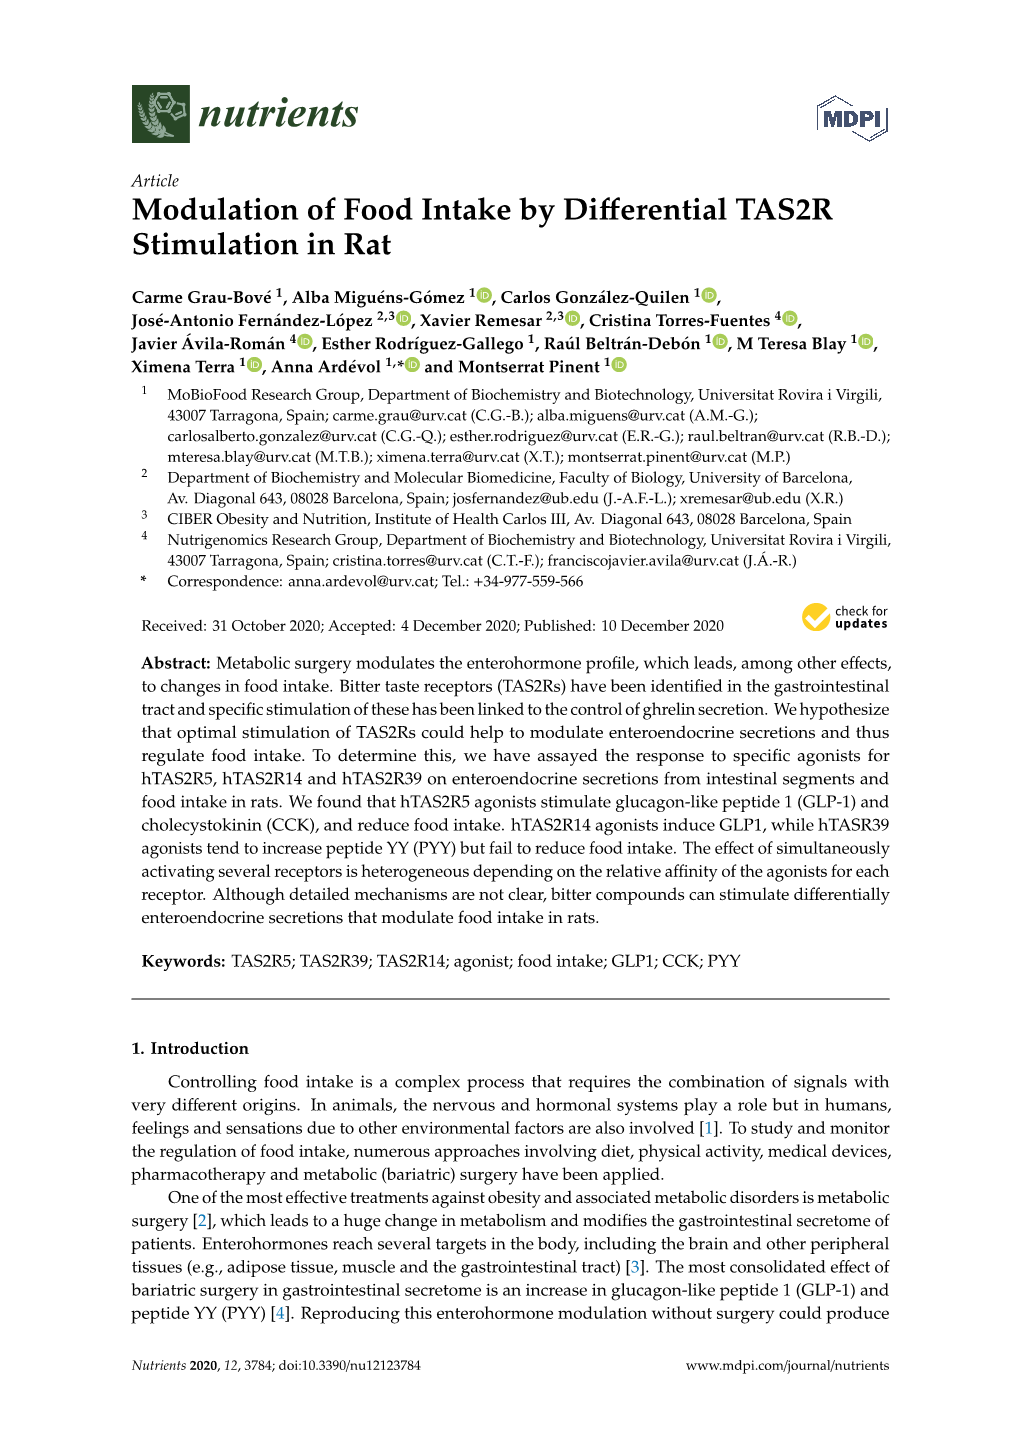 Modulation of Food Intake by Differential TAS2R Stimulation In